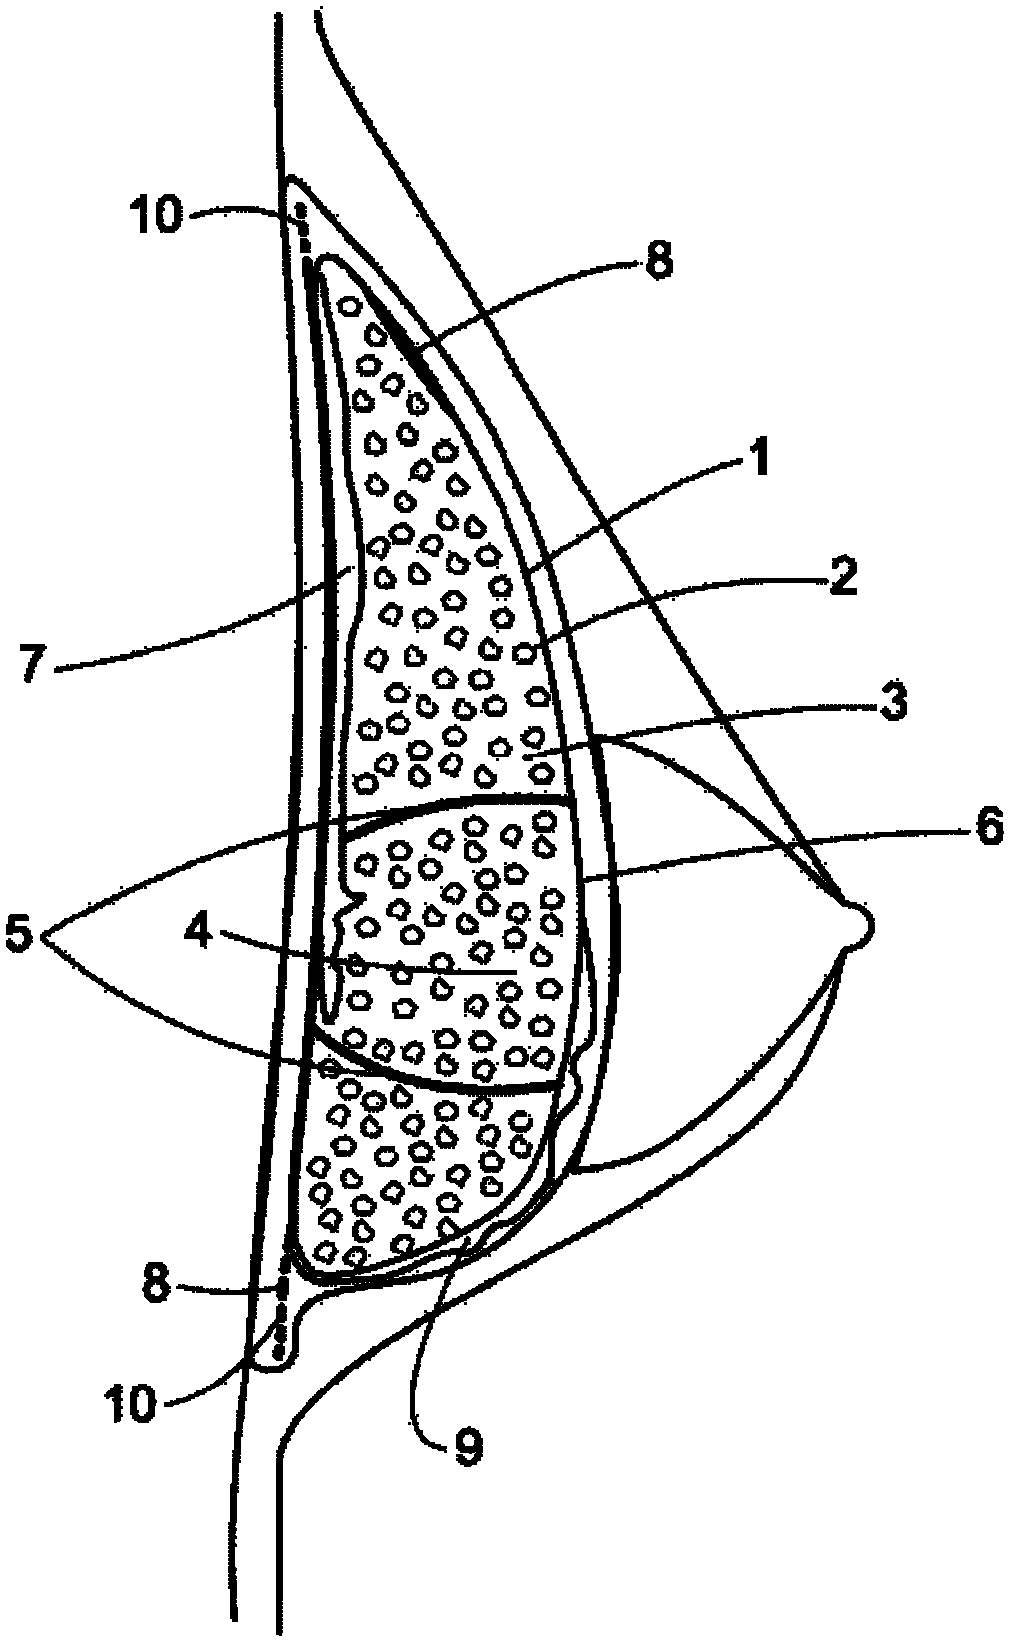 Silicon implant with expandable and/or interactive compartments, optionally coated with a ricinus communis and/or hydroxylapatite polyurethane foam, with attachment flaps or strings